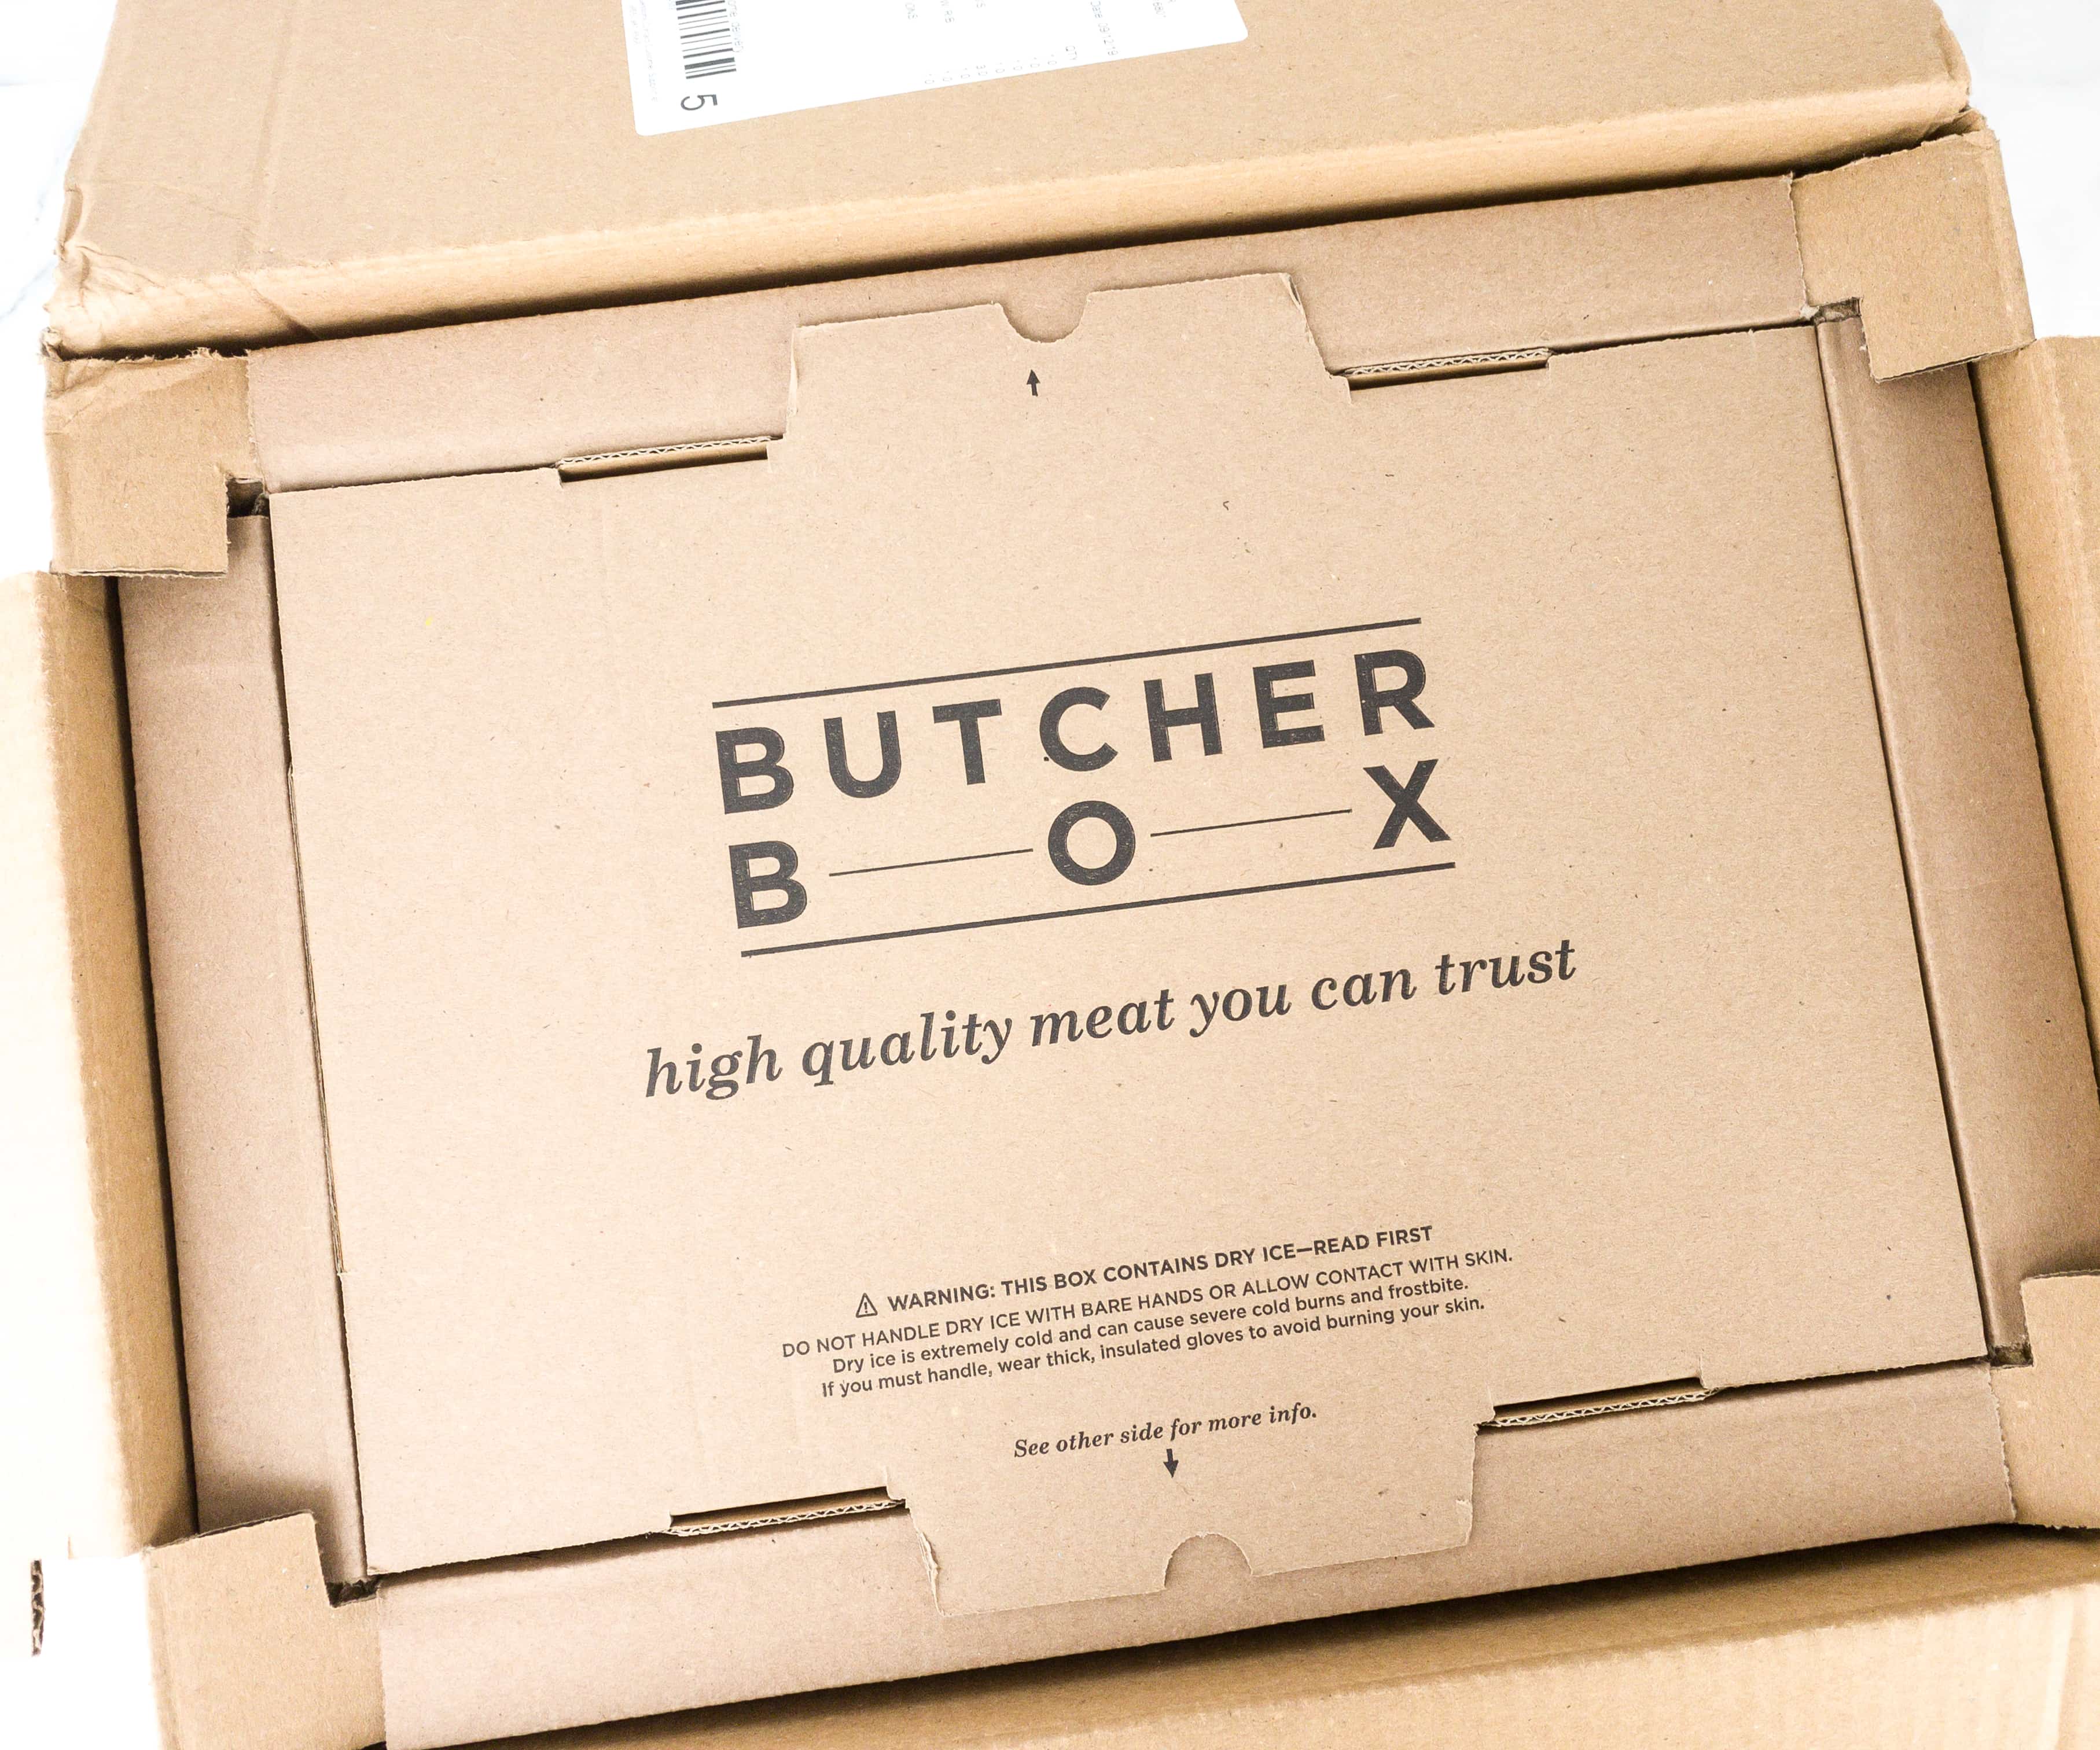 Butcher Box Unboxing  See What's Inside The Box 